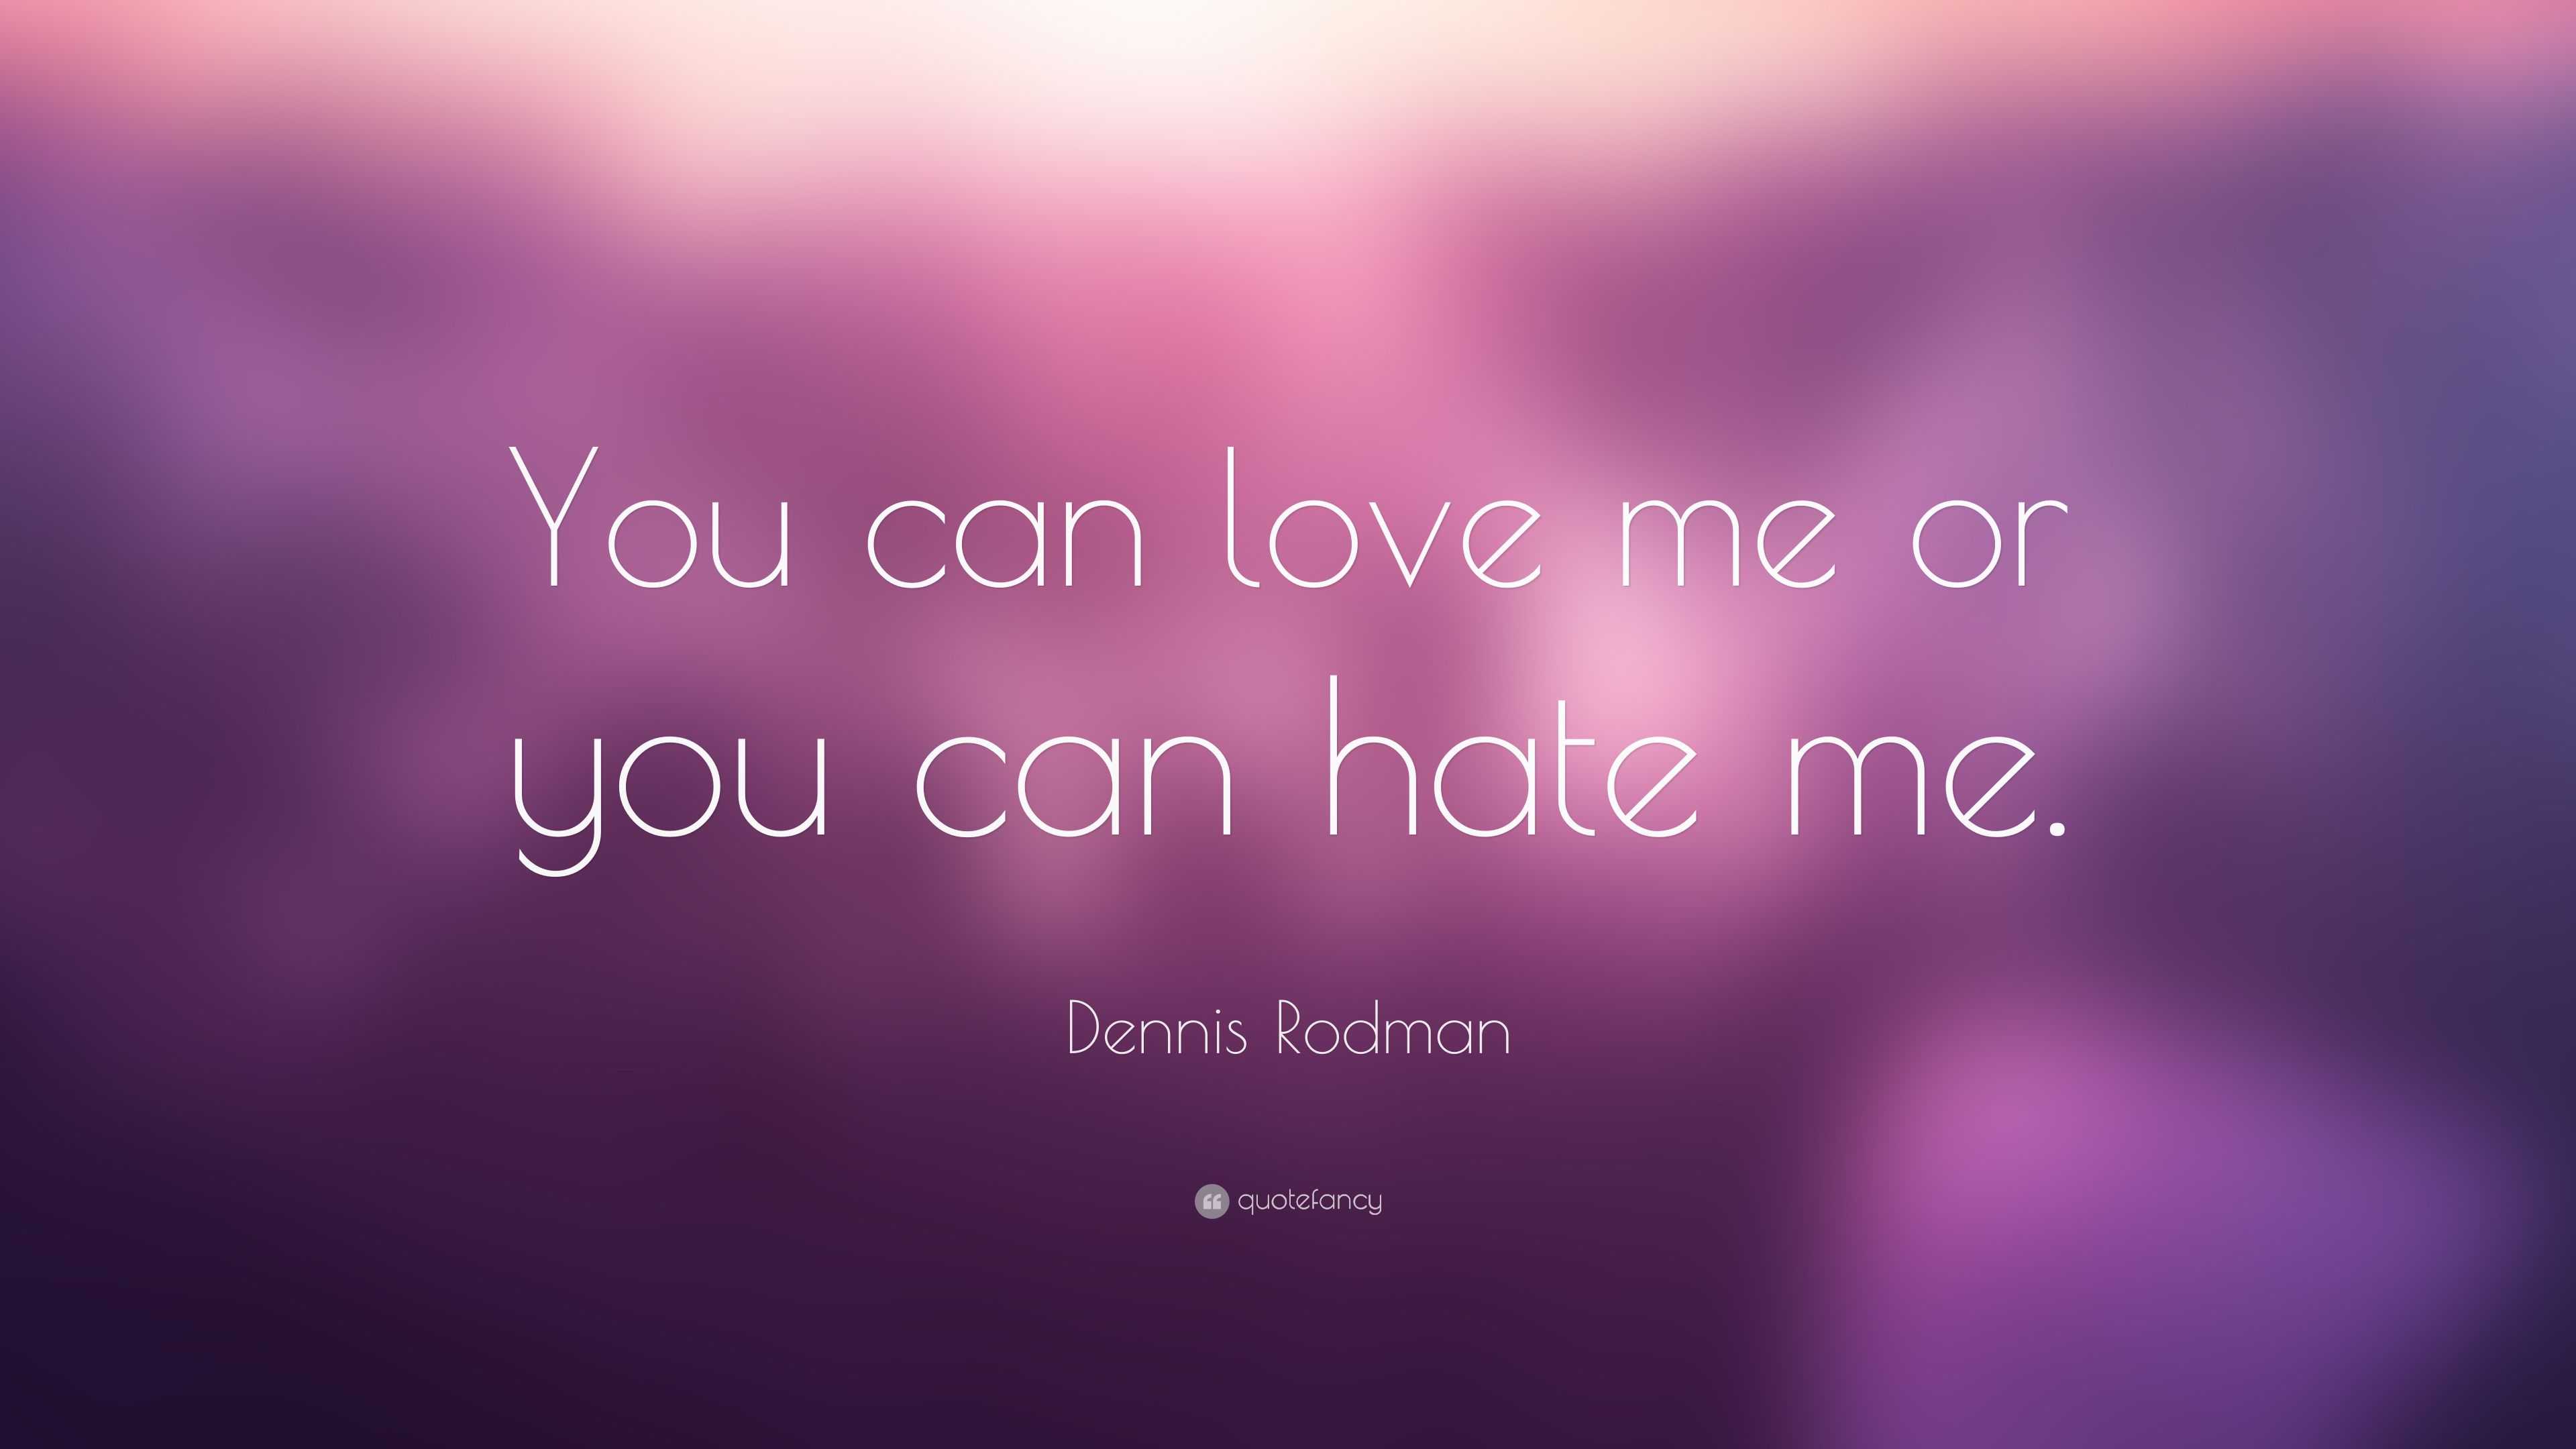 Dennis Rodman Quote “You can love me or you can hate me ”